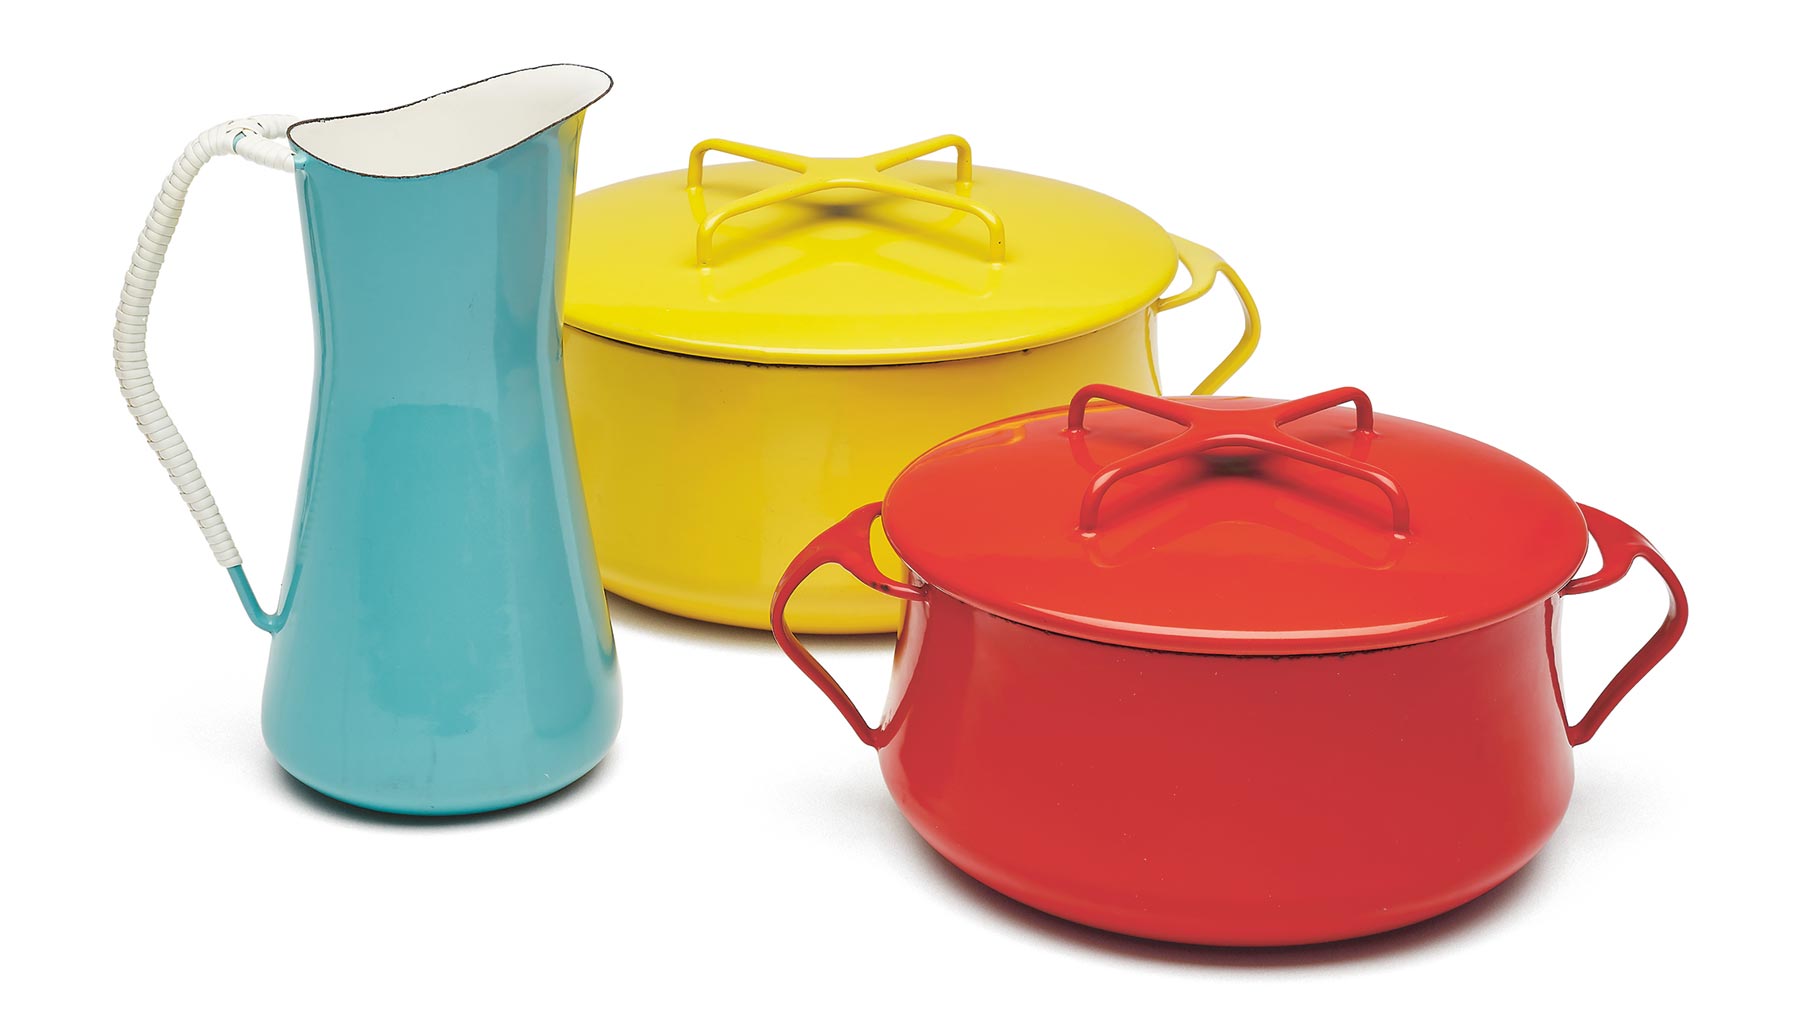 Teal blue pitcher with a yellow and red casserole dish